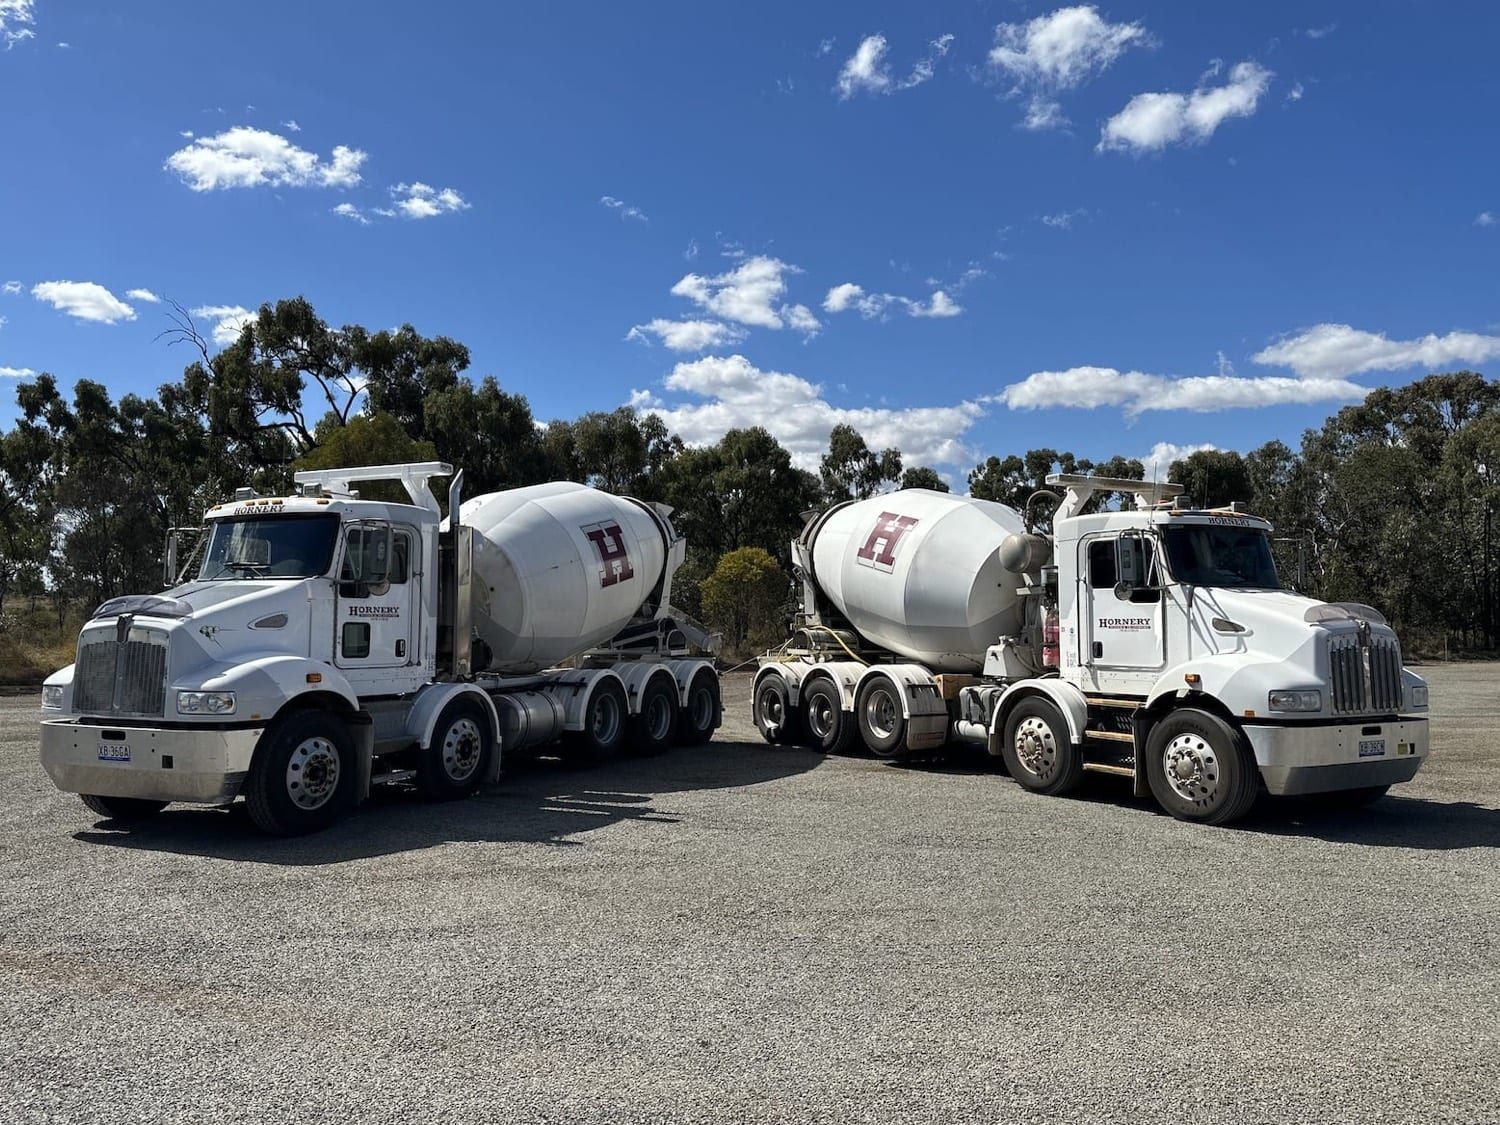 two concrete mixer trucks are parked next to each other in a gravel lot .